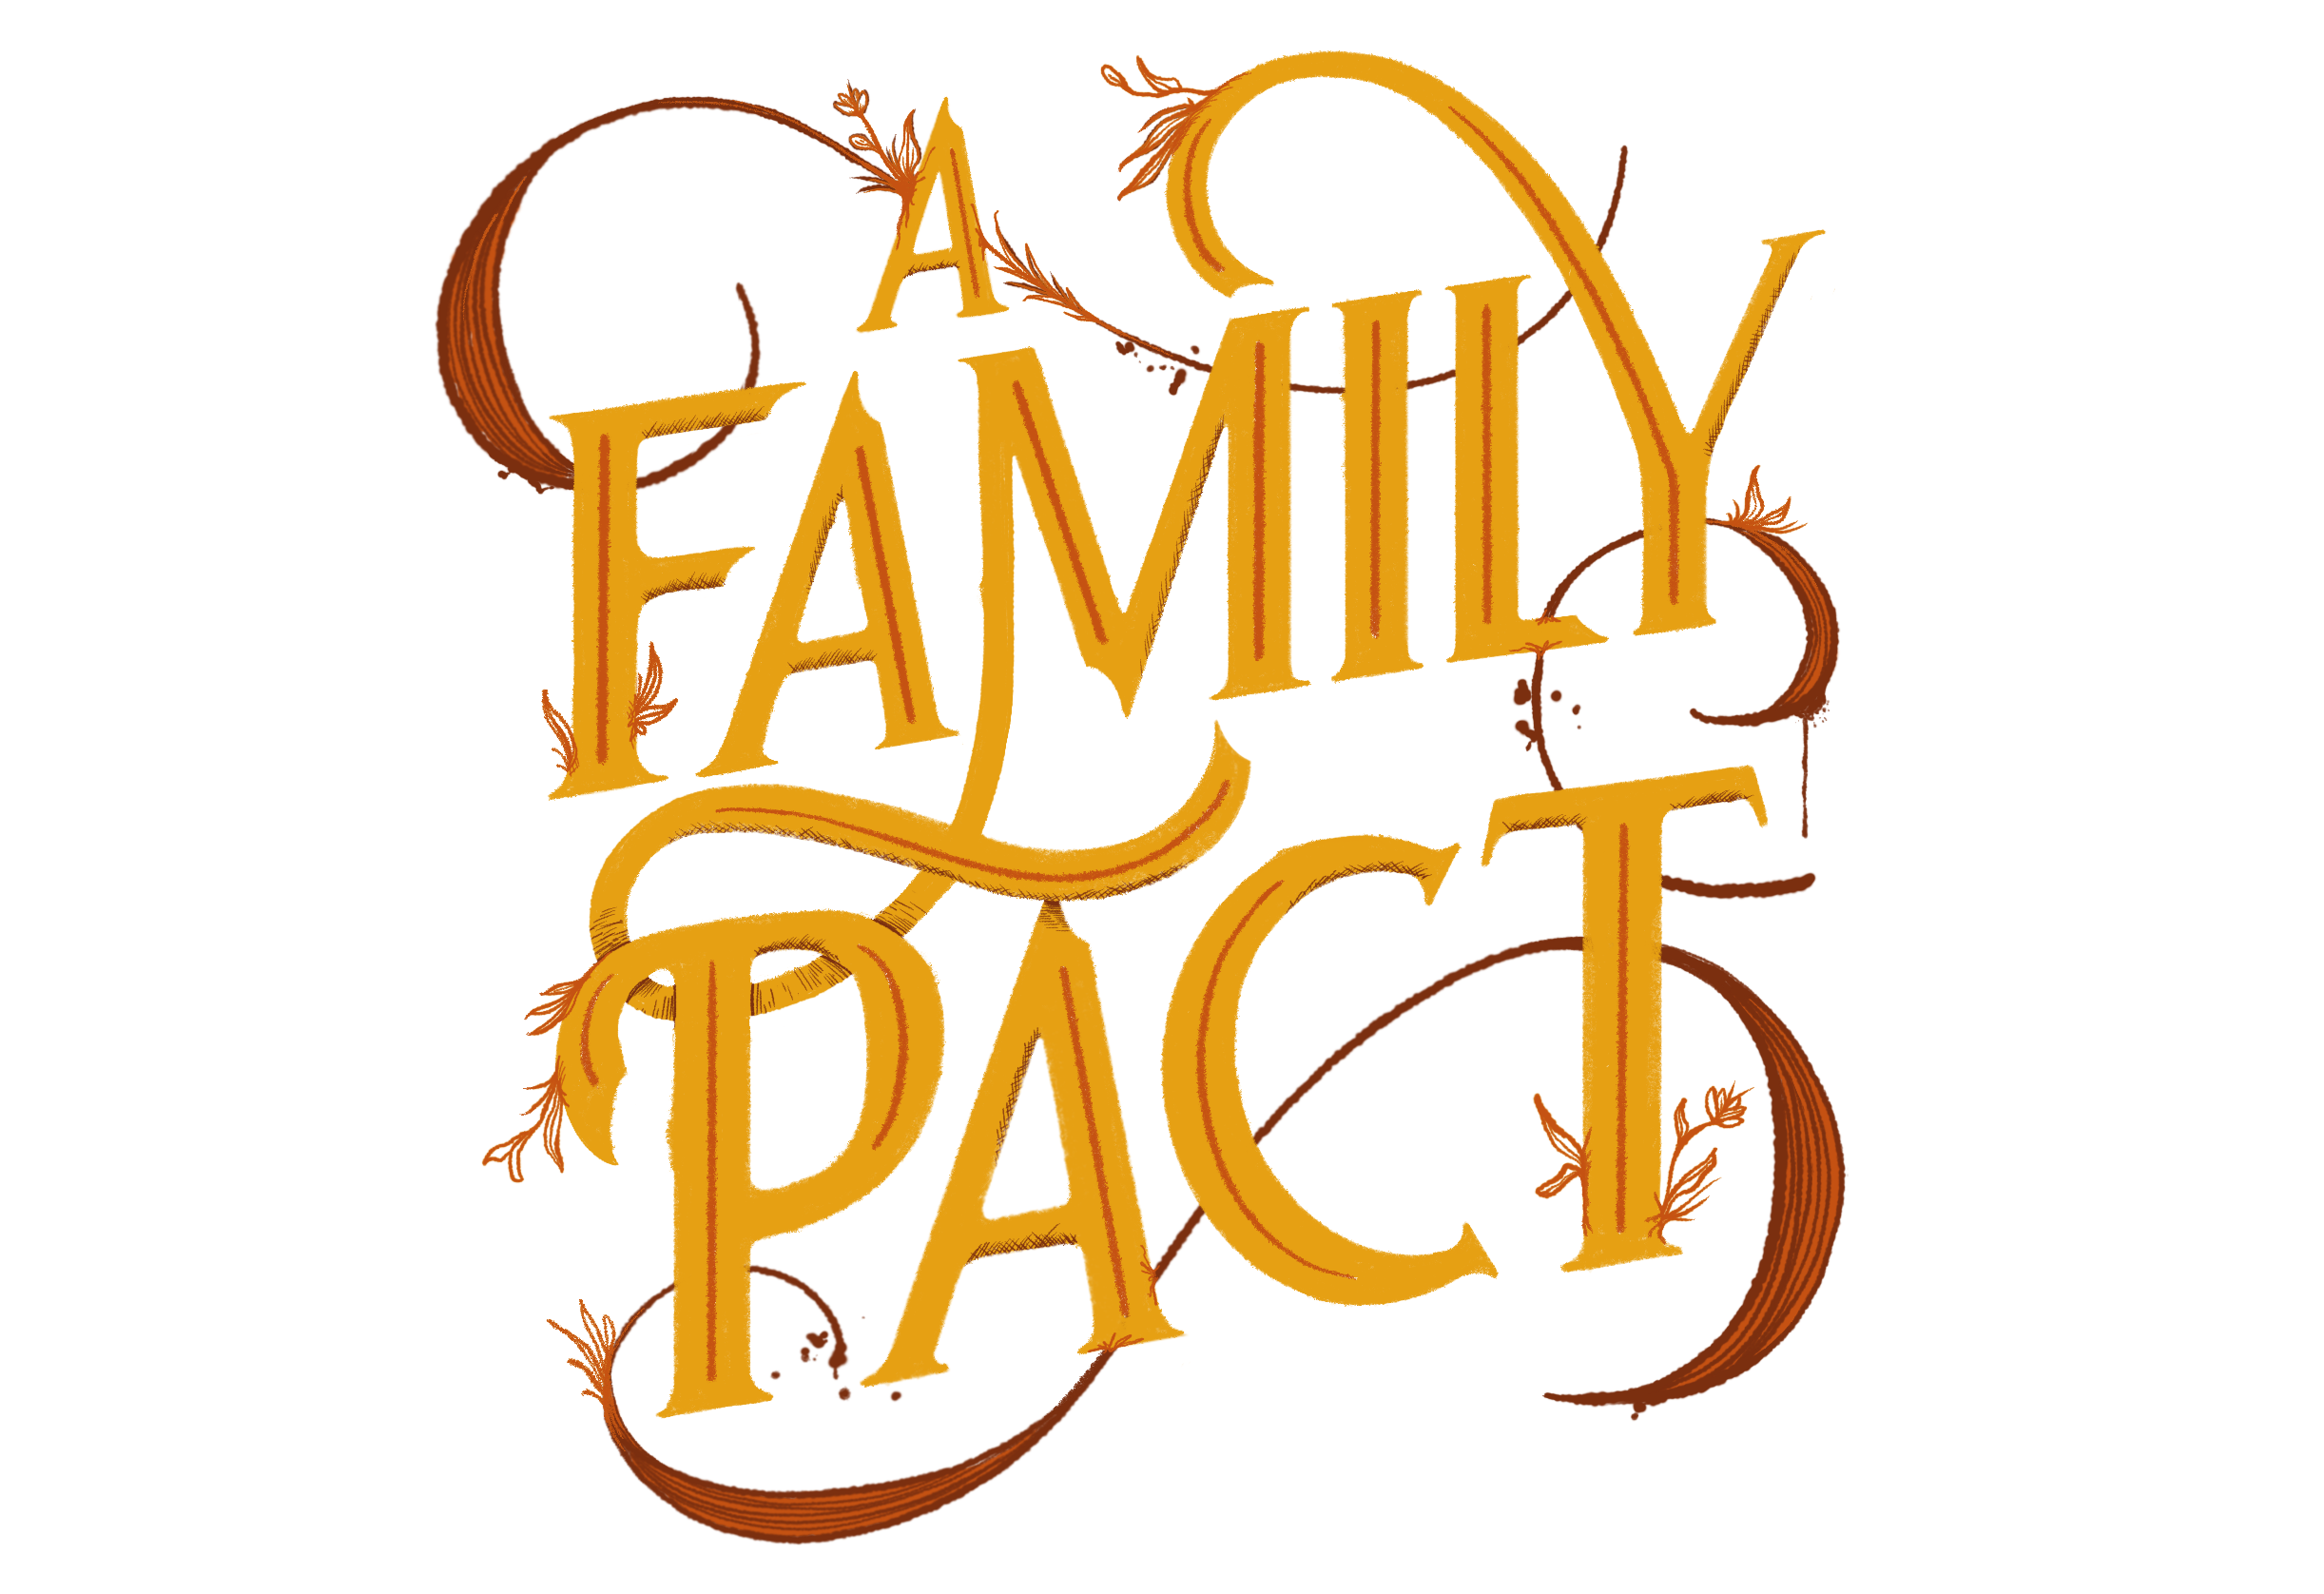 A Family Pact